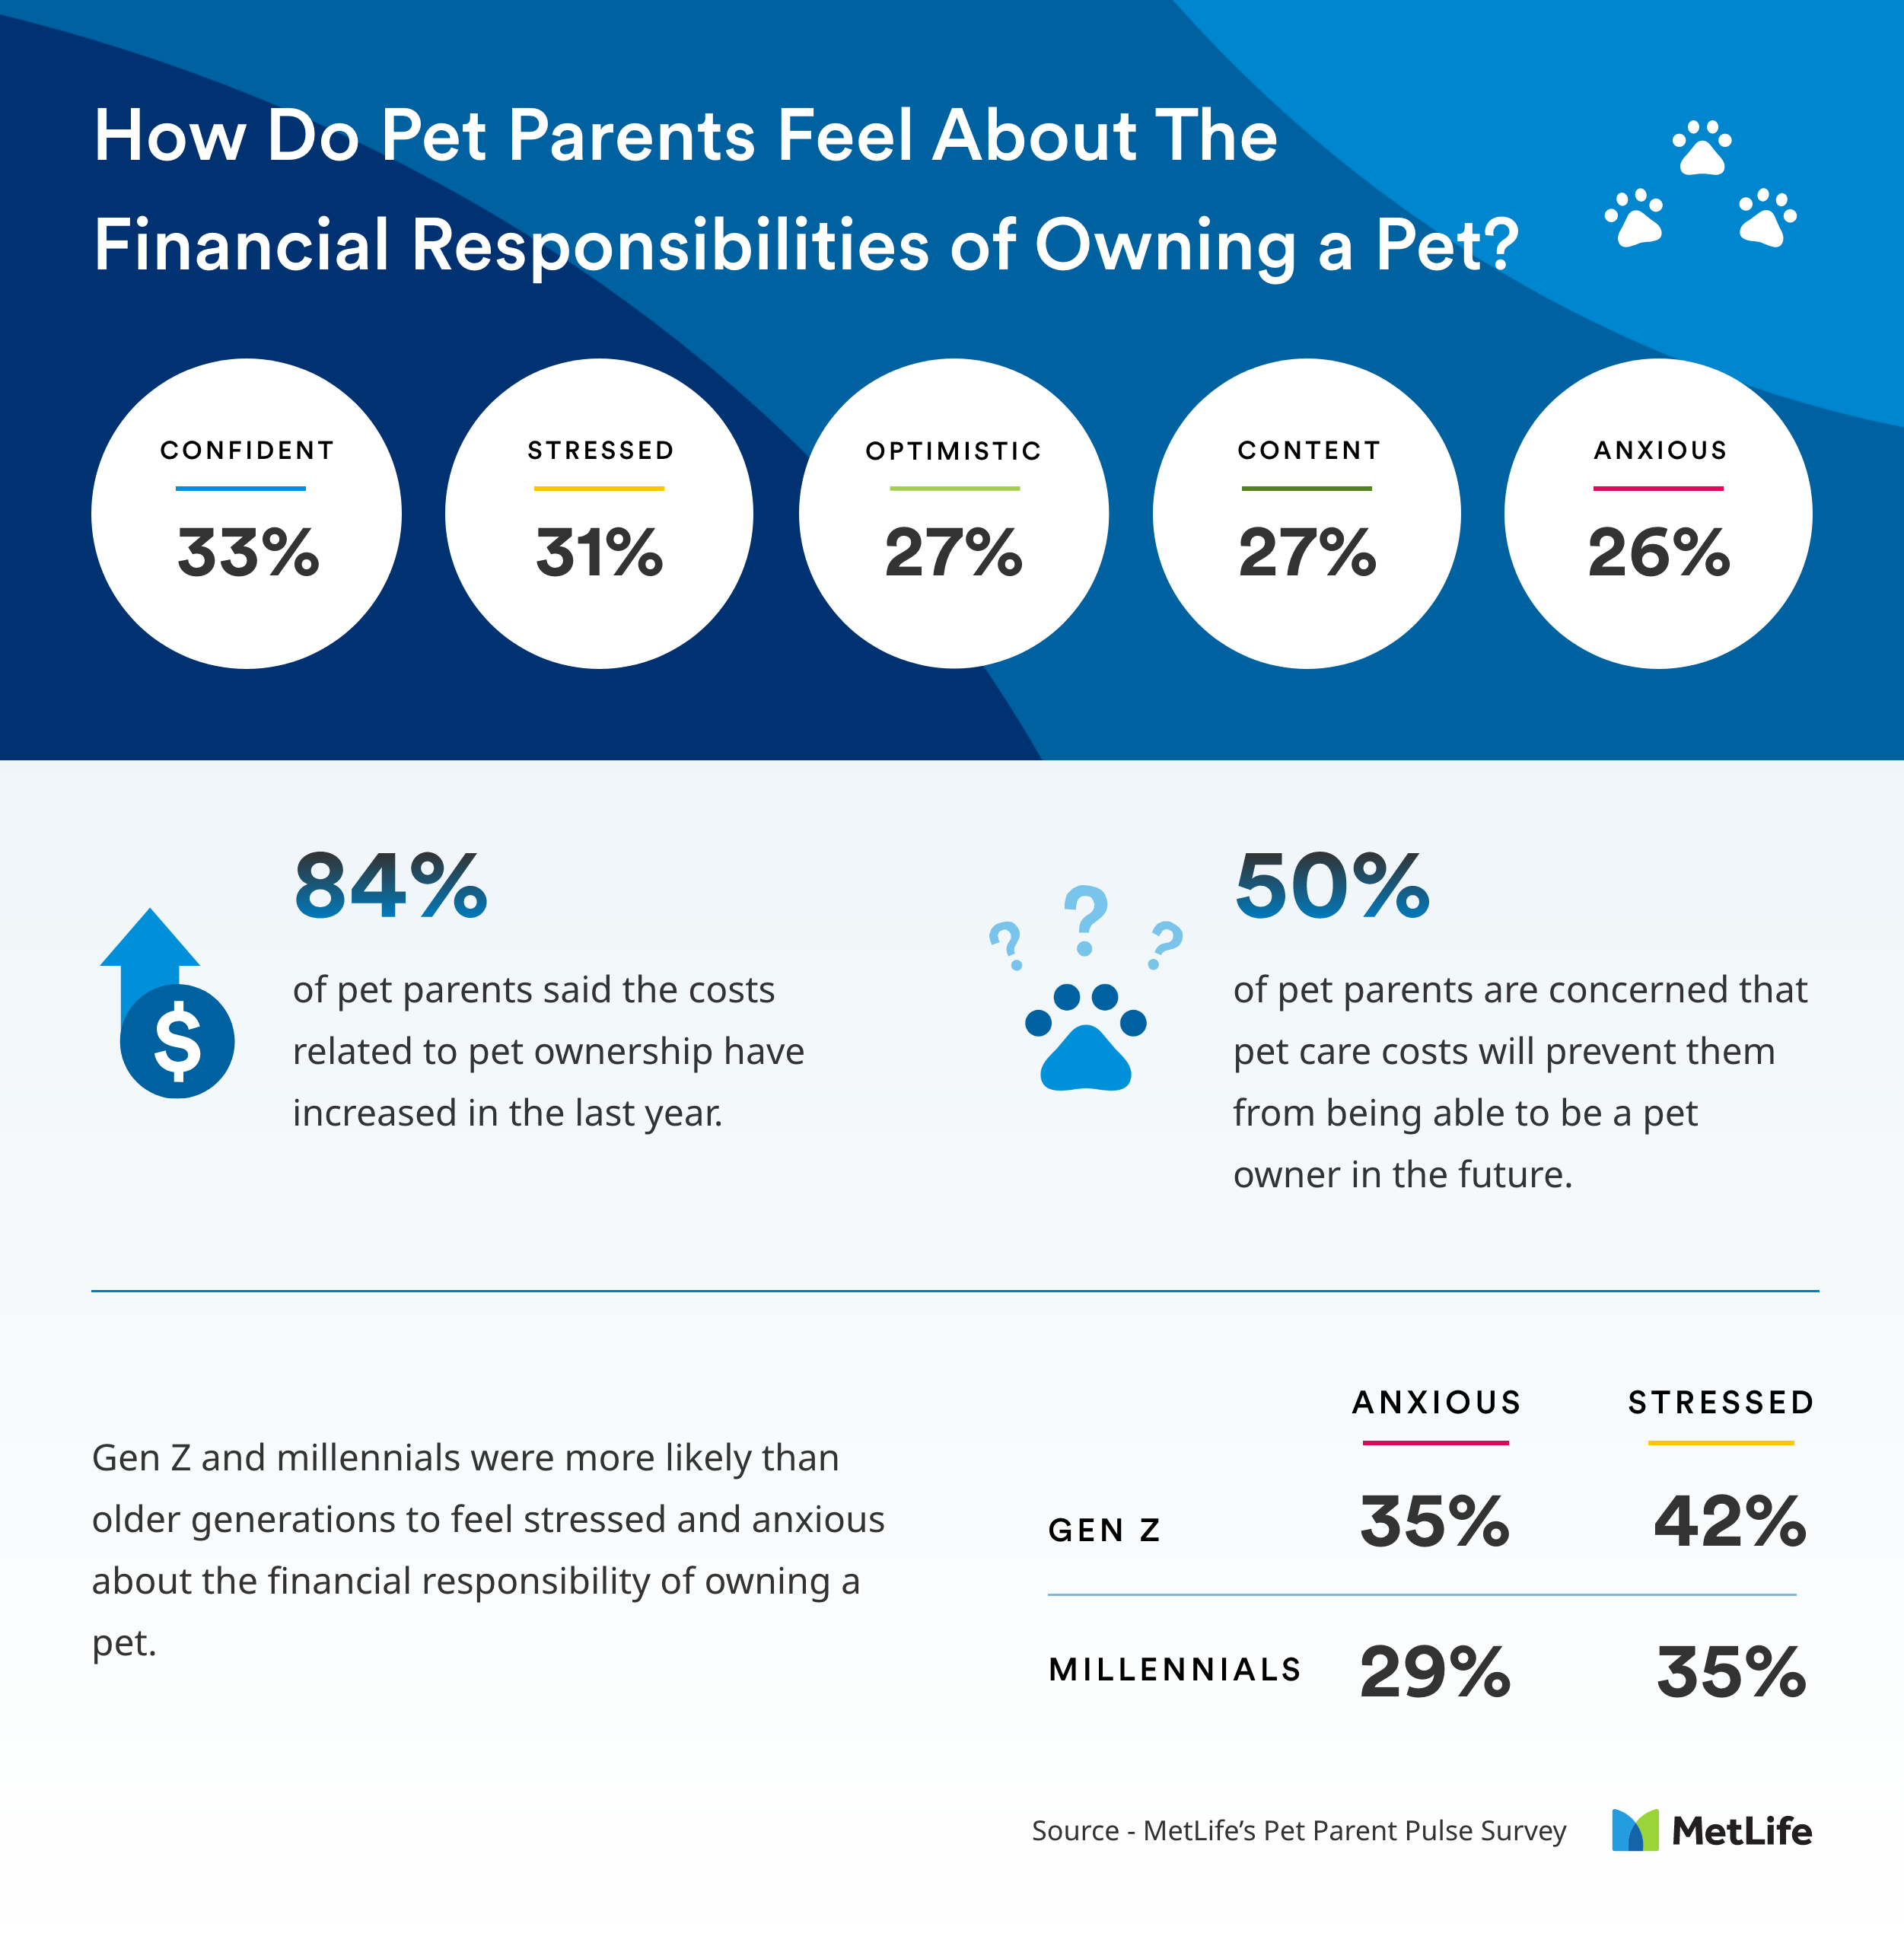 How Do Pet Parents Feel About the Costs of Owning a Pet? 50% are concerned; Gen Z & millennials feel particularly stressed.